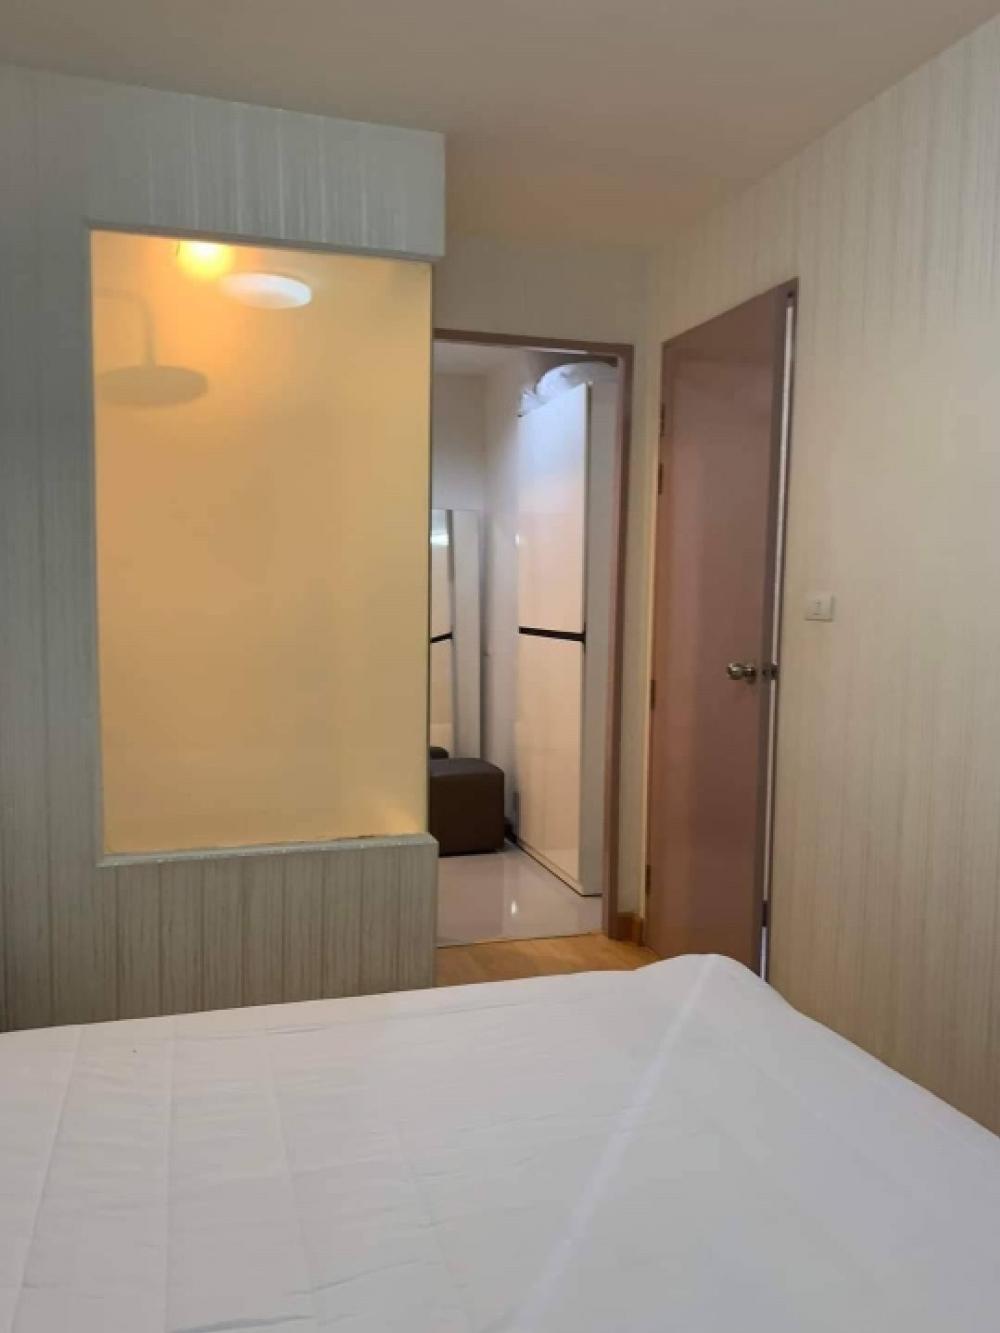 For RentCondoLadprao, Central Ladprao : ★ Ideo Ladprao5 ★ Size 34 sq m., 22th floor (1 bedroom, 1 bathroom), ★ Near Mrt Phahon Yothin ★ Very convenient travel ★ Lots of shopping and eating places. ★Complete electrical appliances★